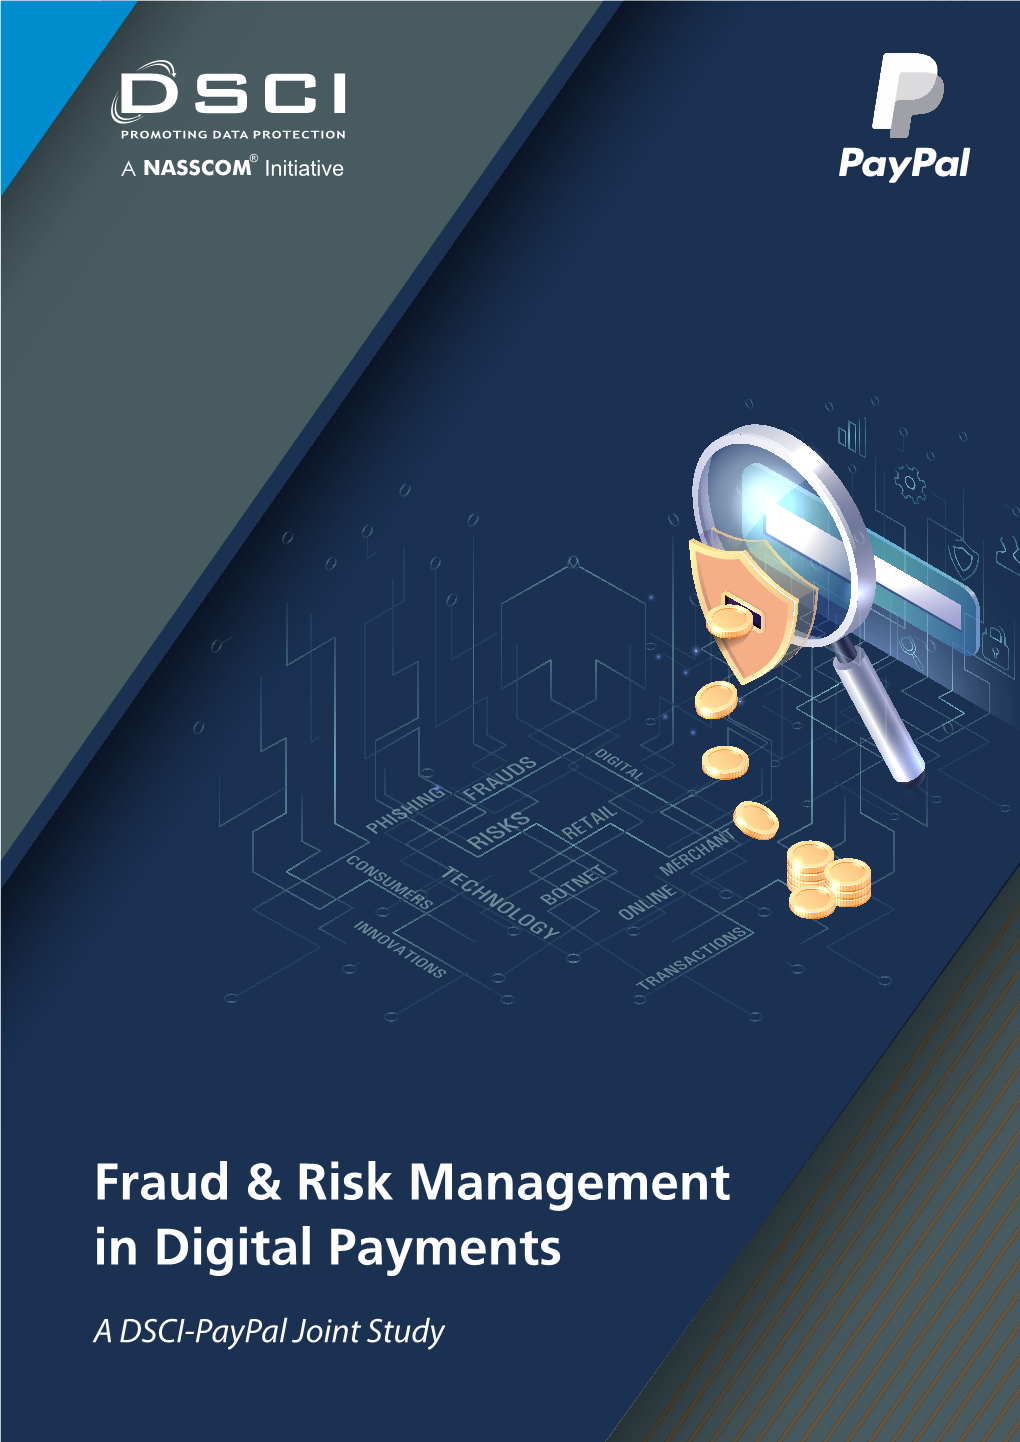 Fraud & Risk Management in Digital Payments